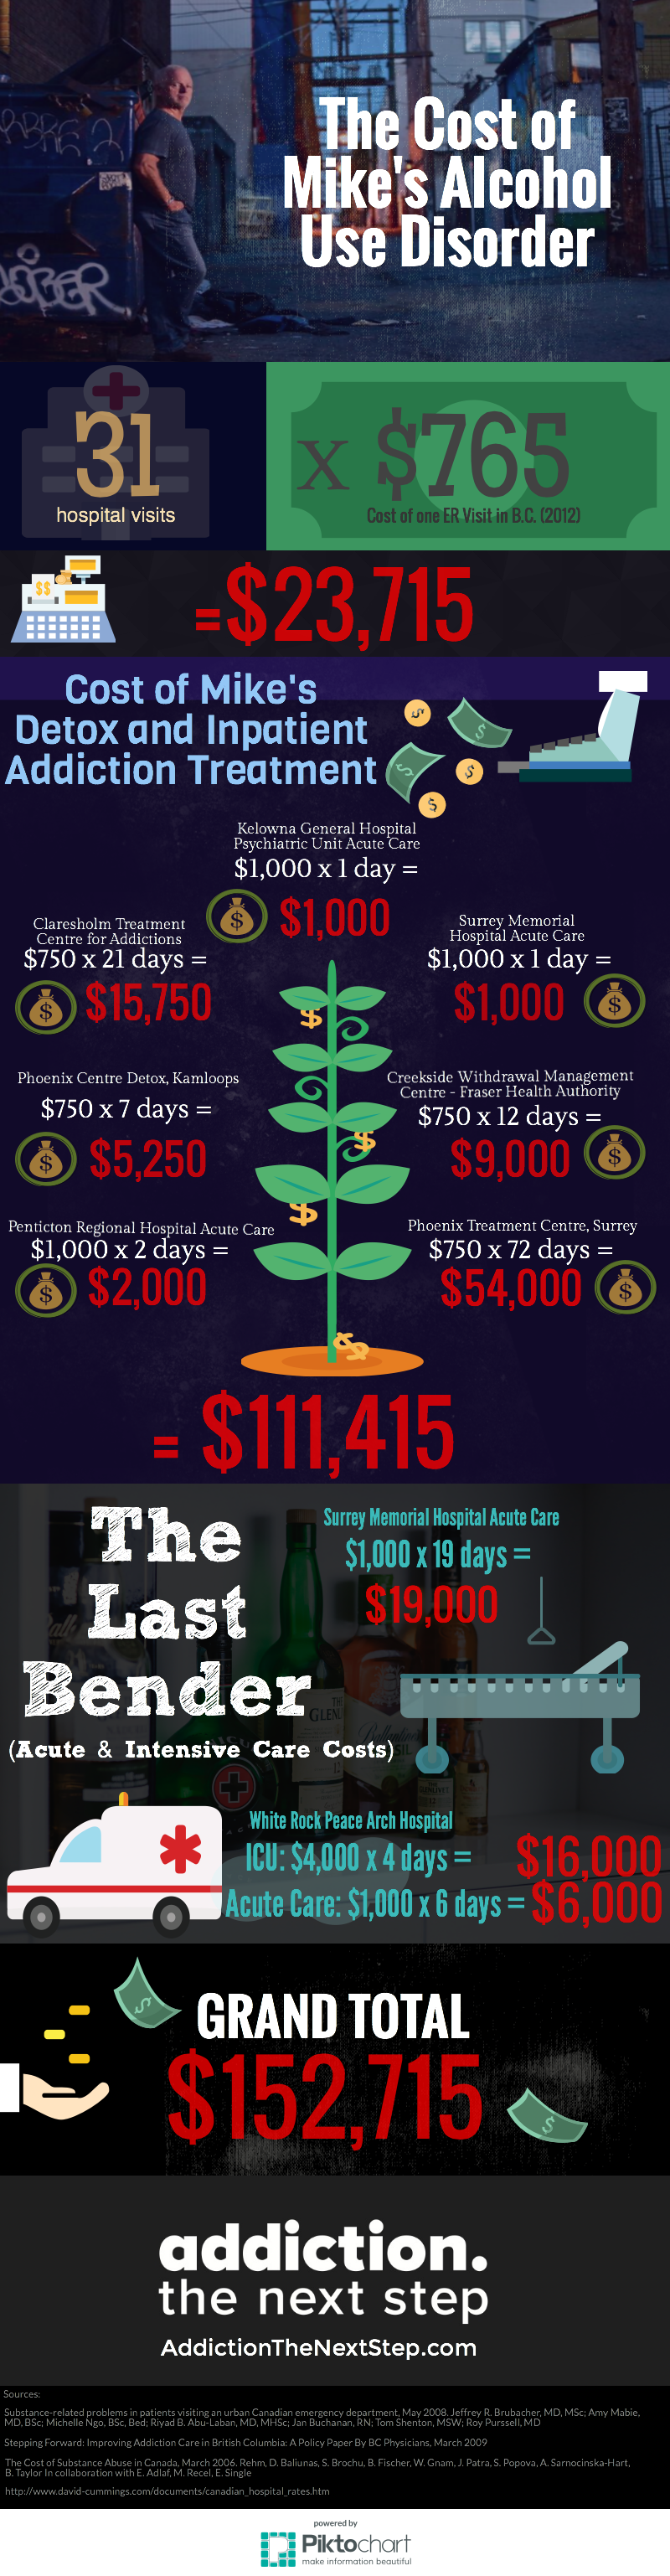 The Cost of Addiction Infographic 2